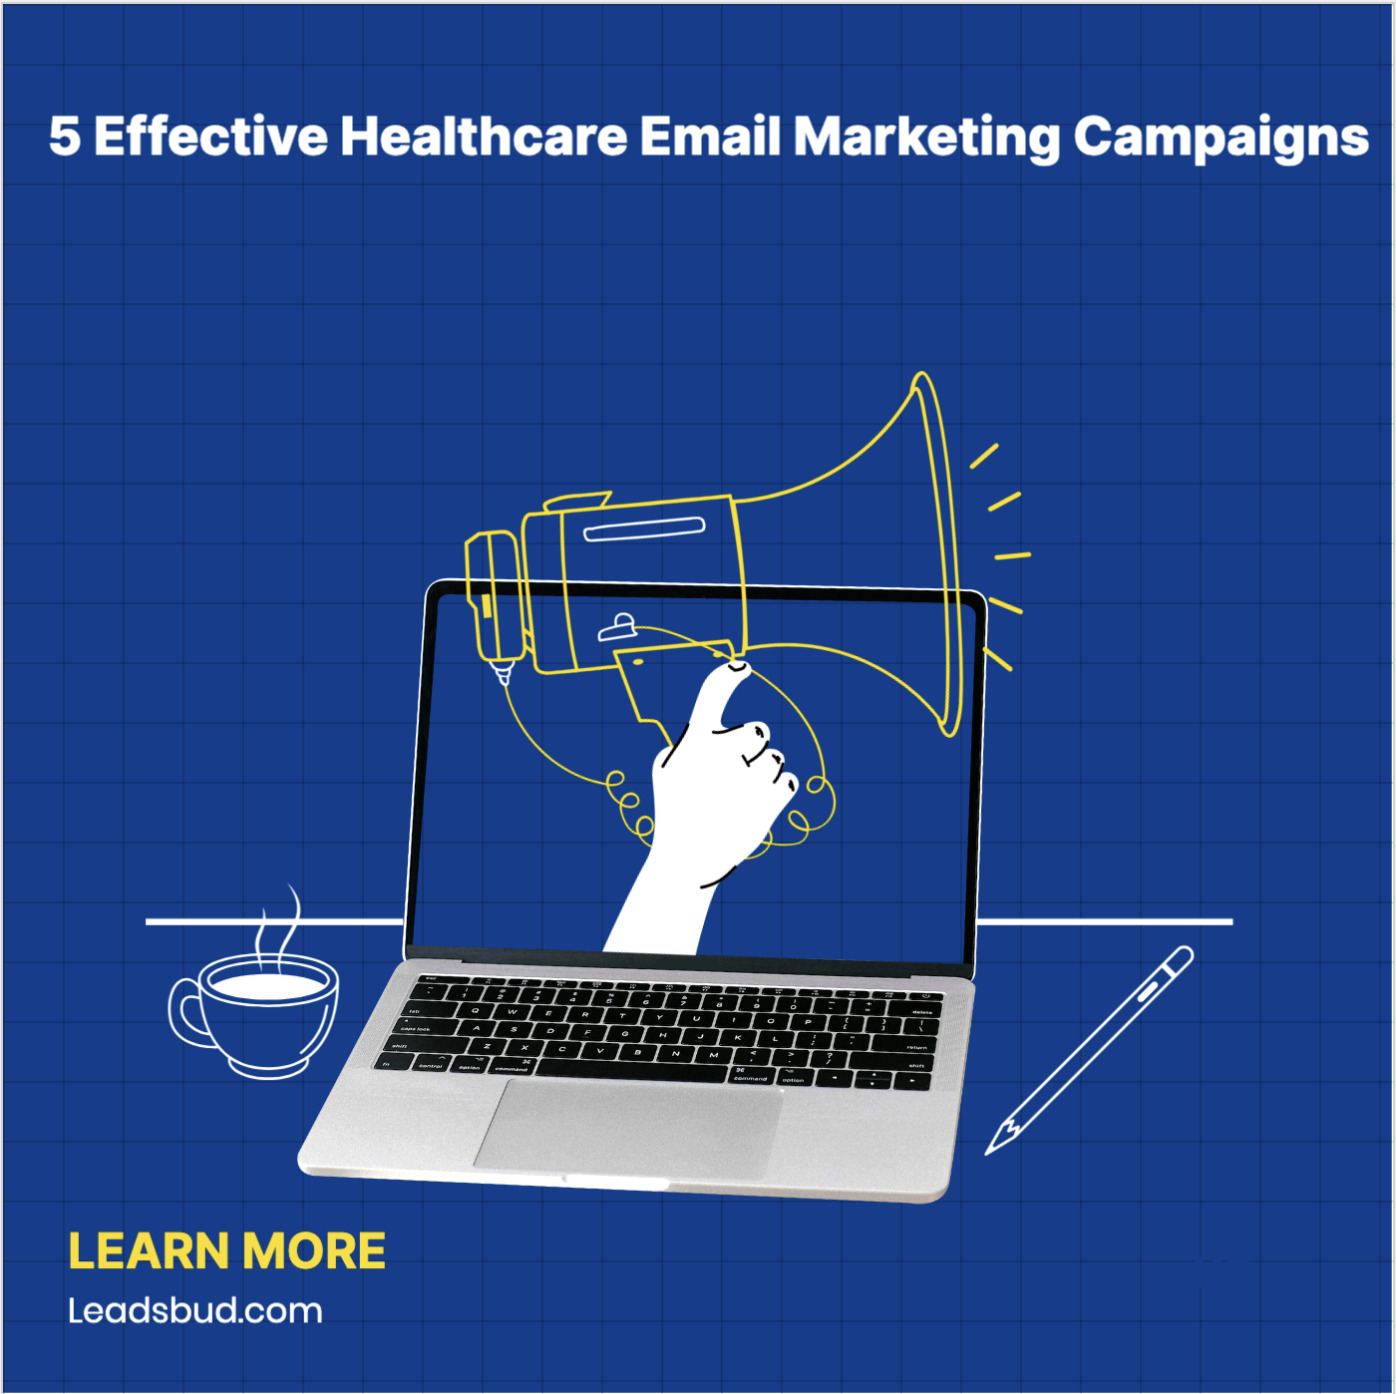 5 Effective Healthcare Email Marketing Campaigns